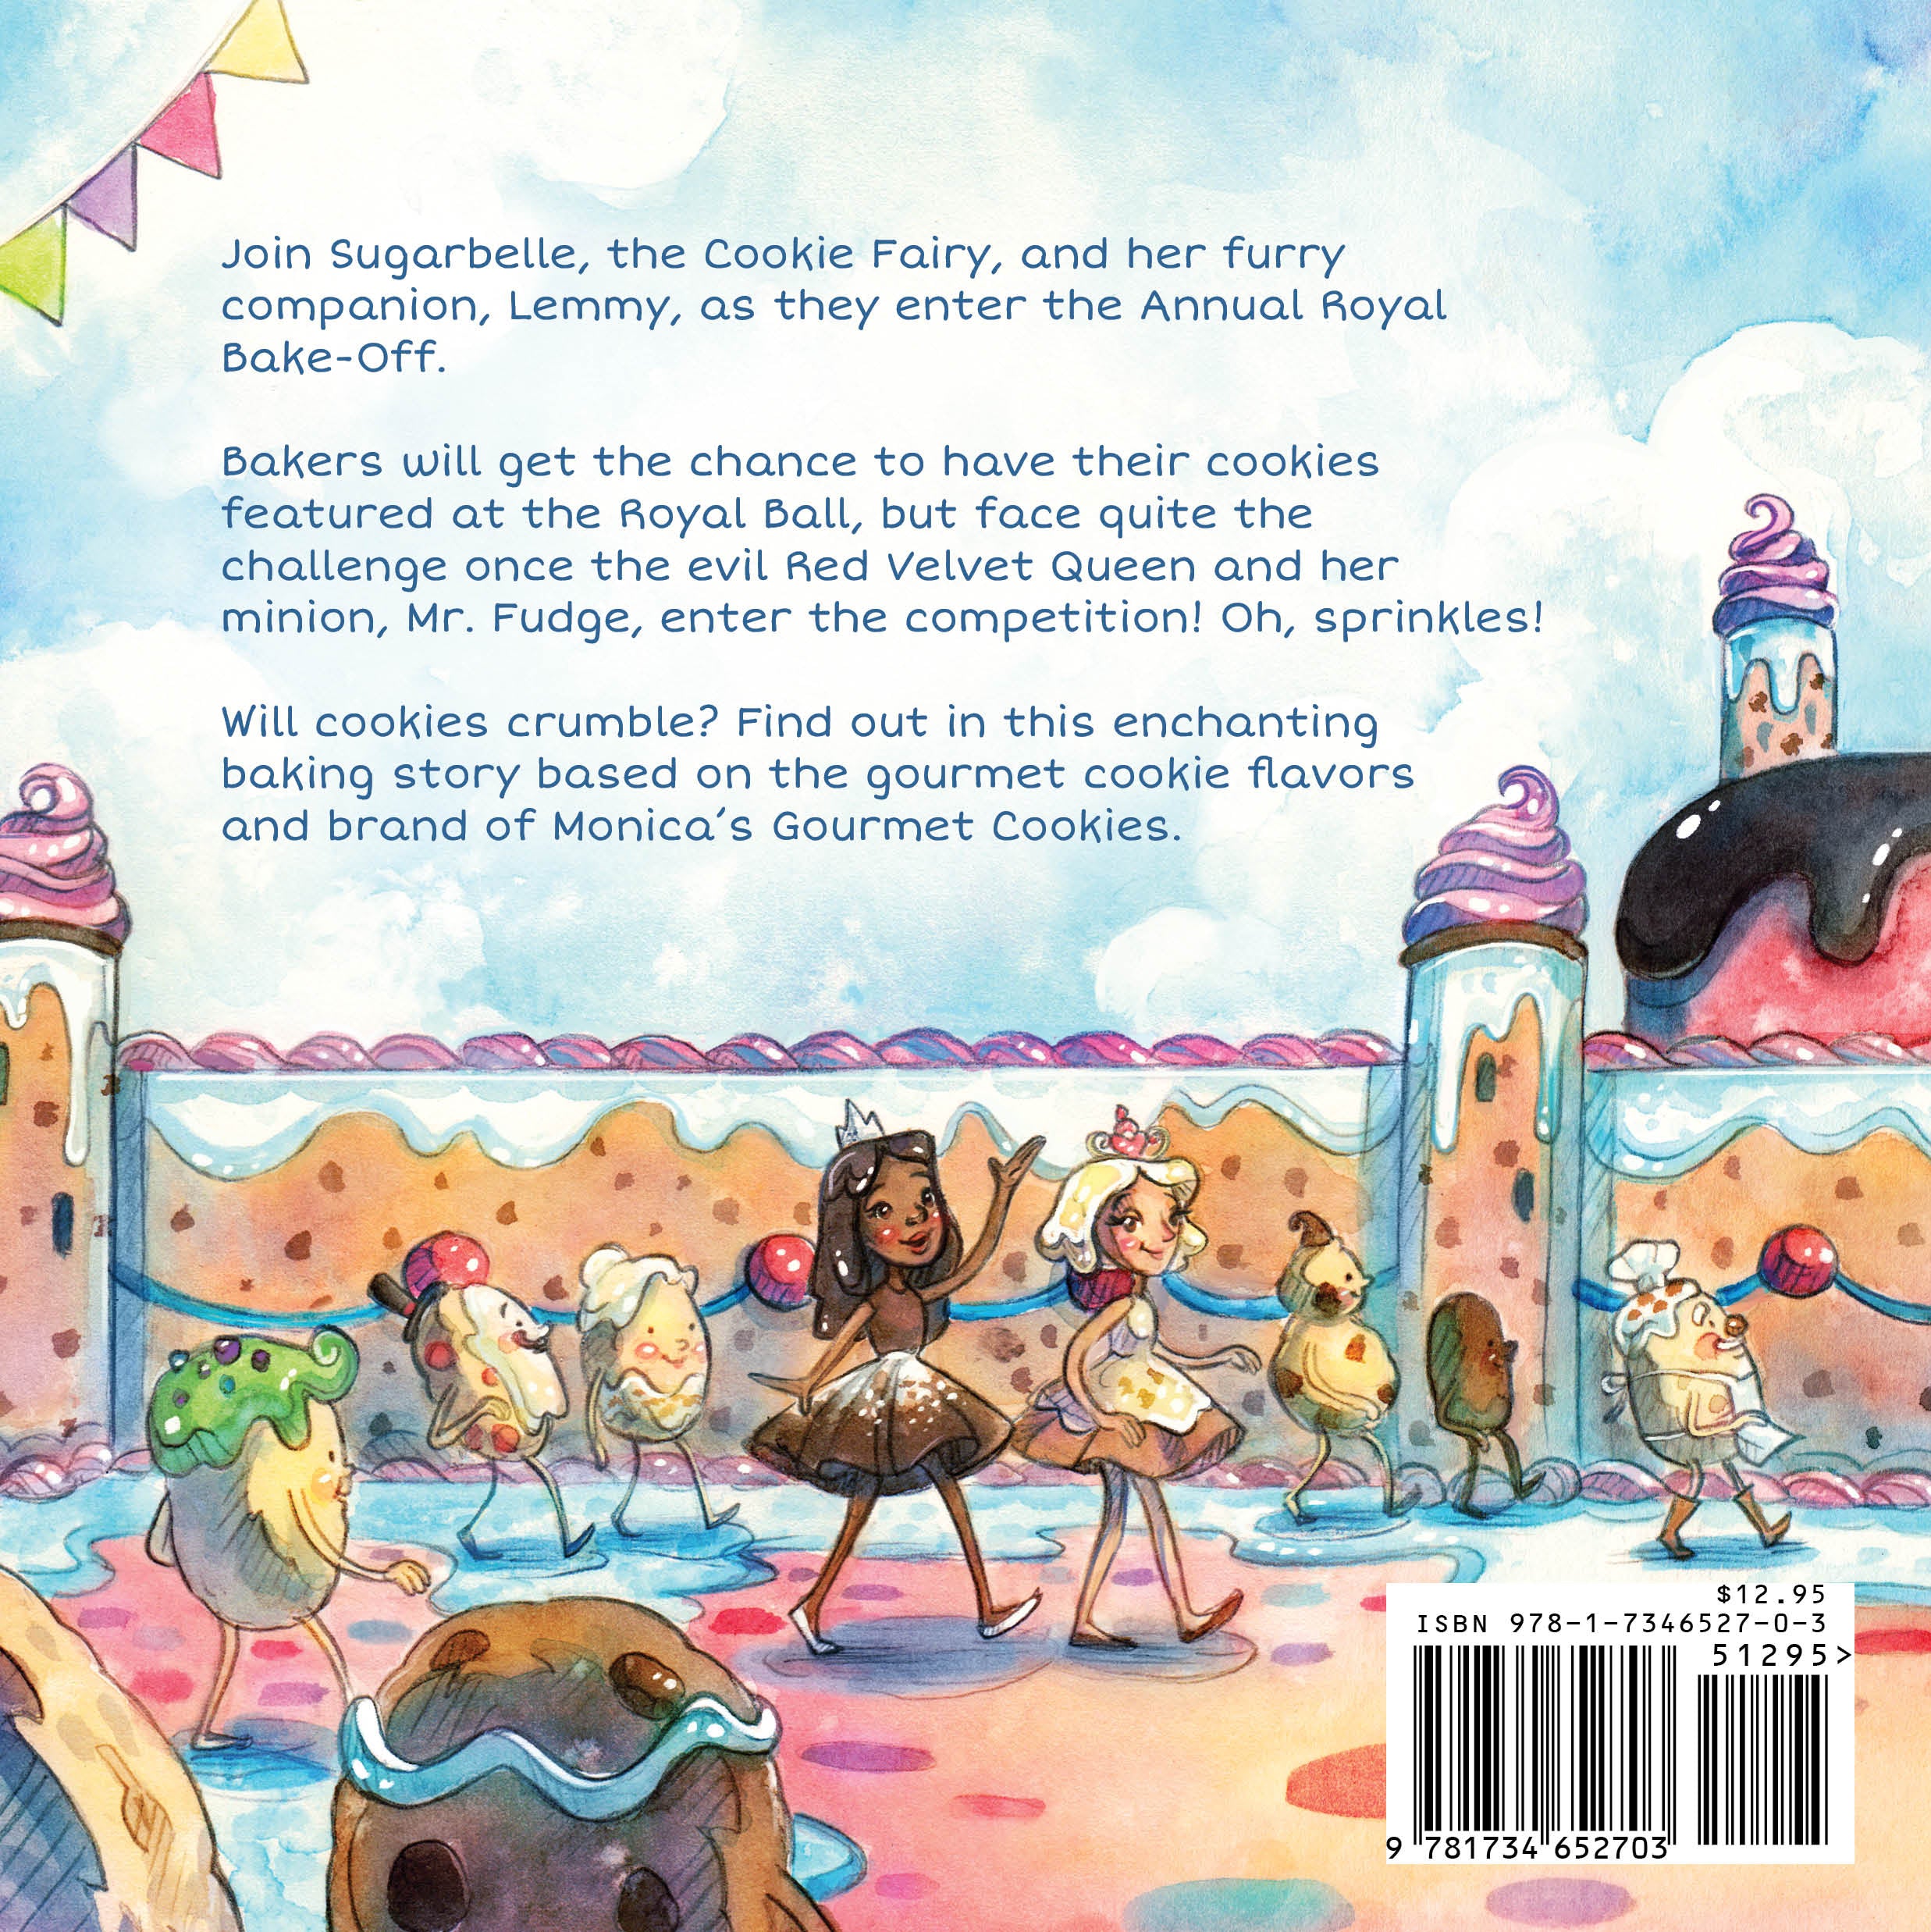 The backside of our children's book, The Annual Royal Bake-Off. | Monica's Gourmet Cookies